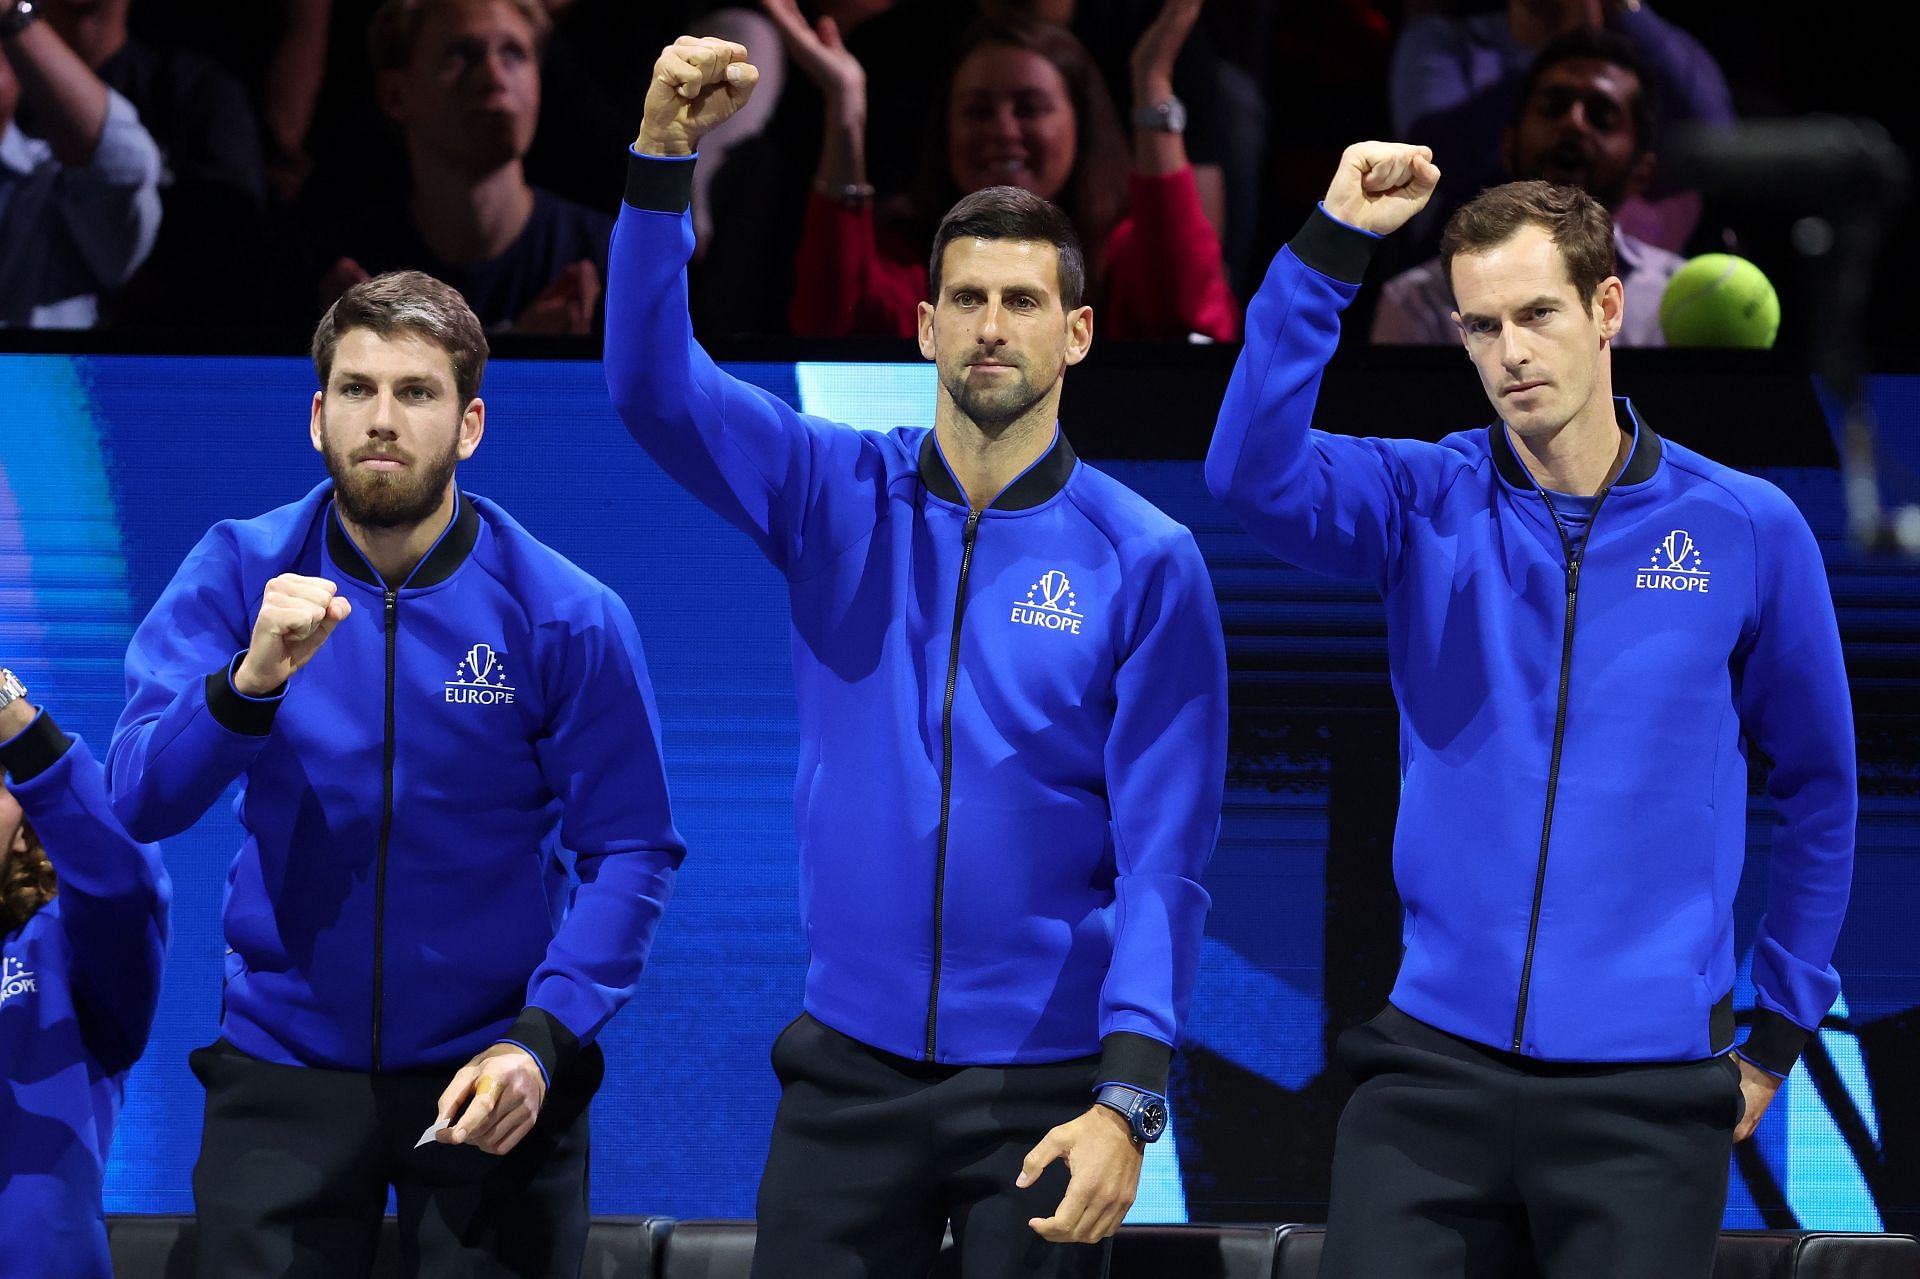 Cameron Norrie(left), Novak Djokovic(center) and Andy Murray(right) at the 2022 Laver Cup